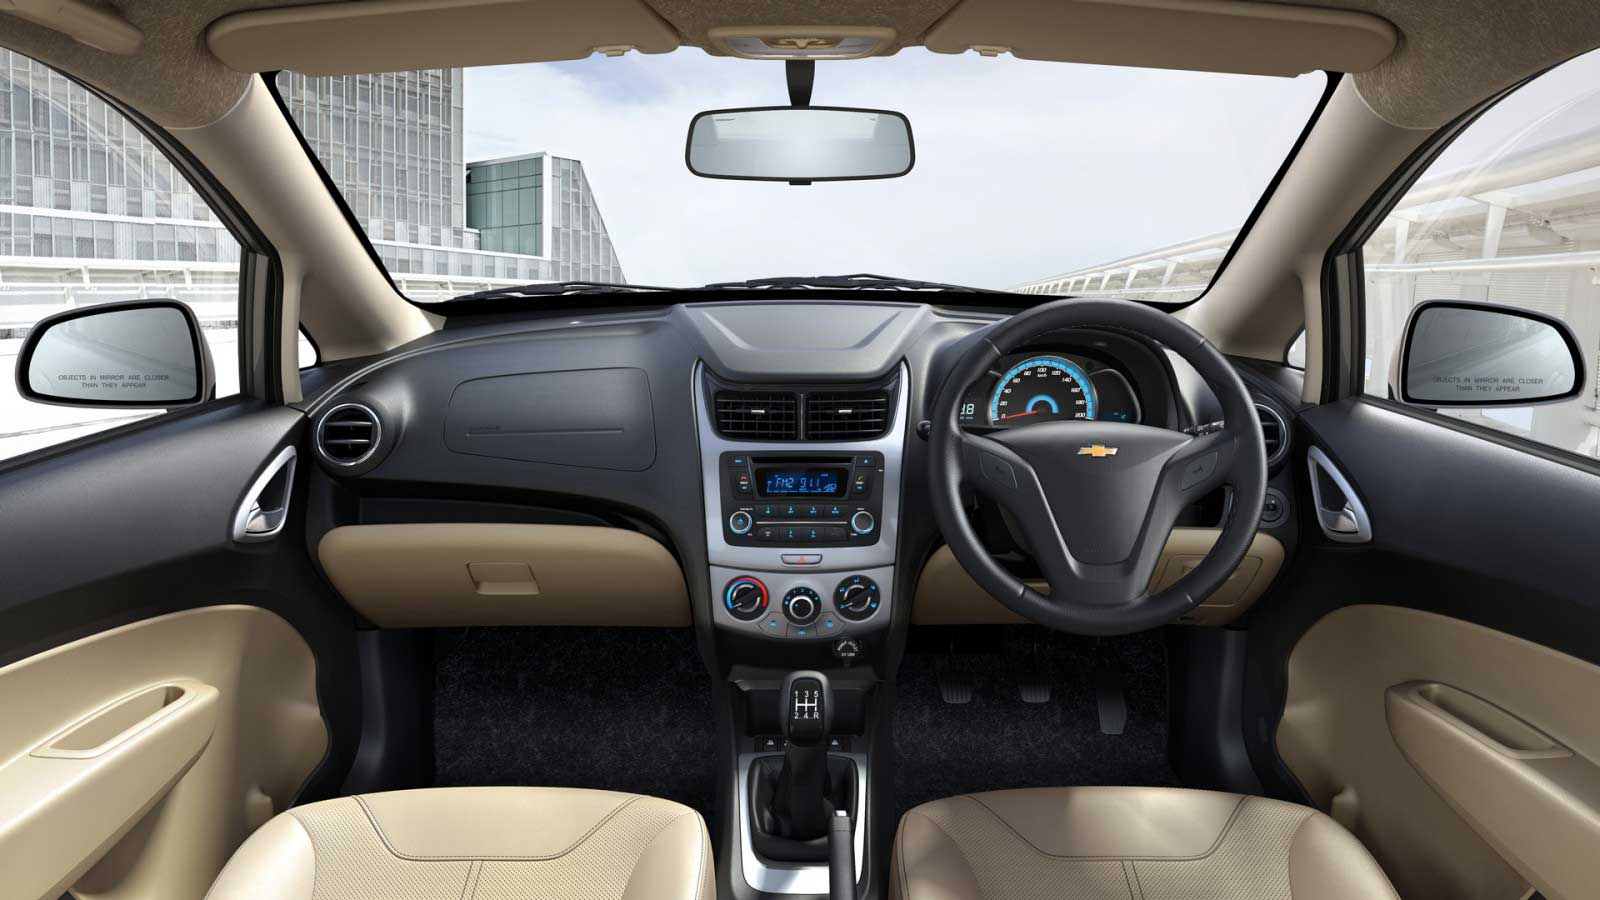 Chevrolet Sail 1.2 LT ABS Interior front view